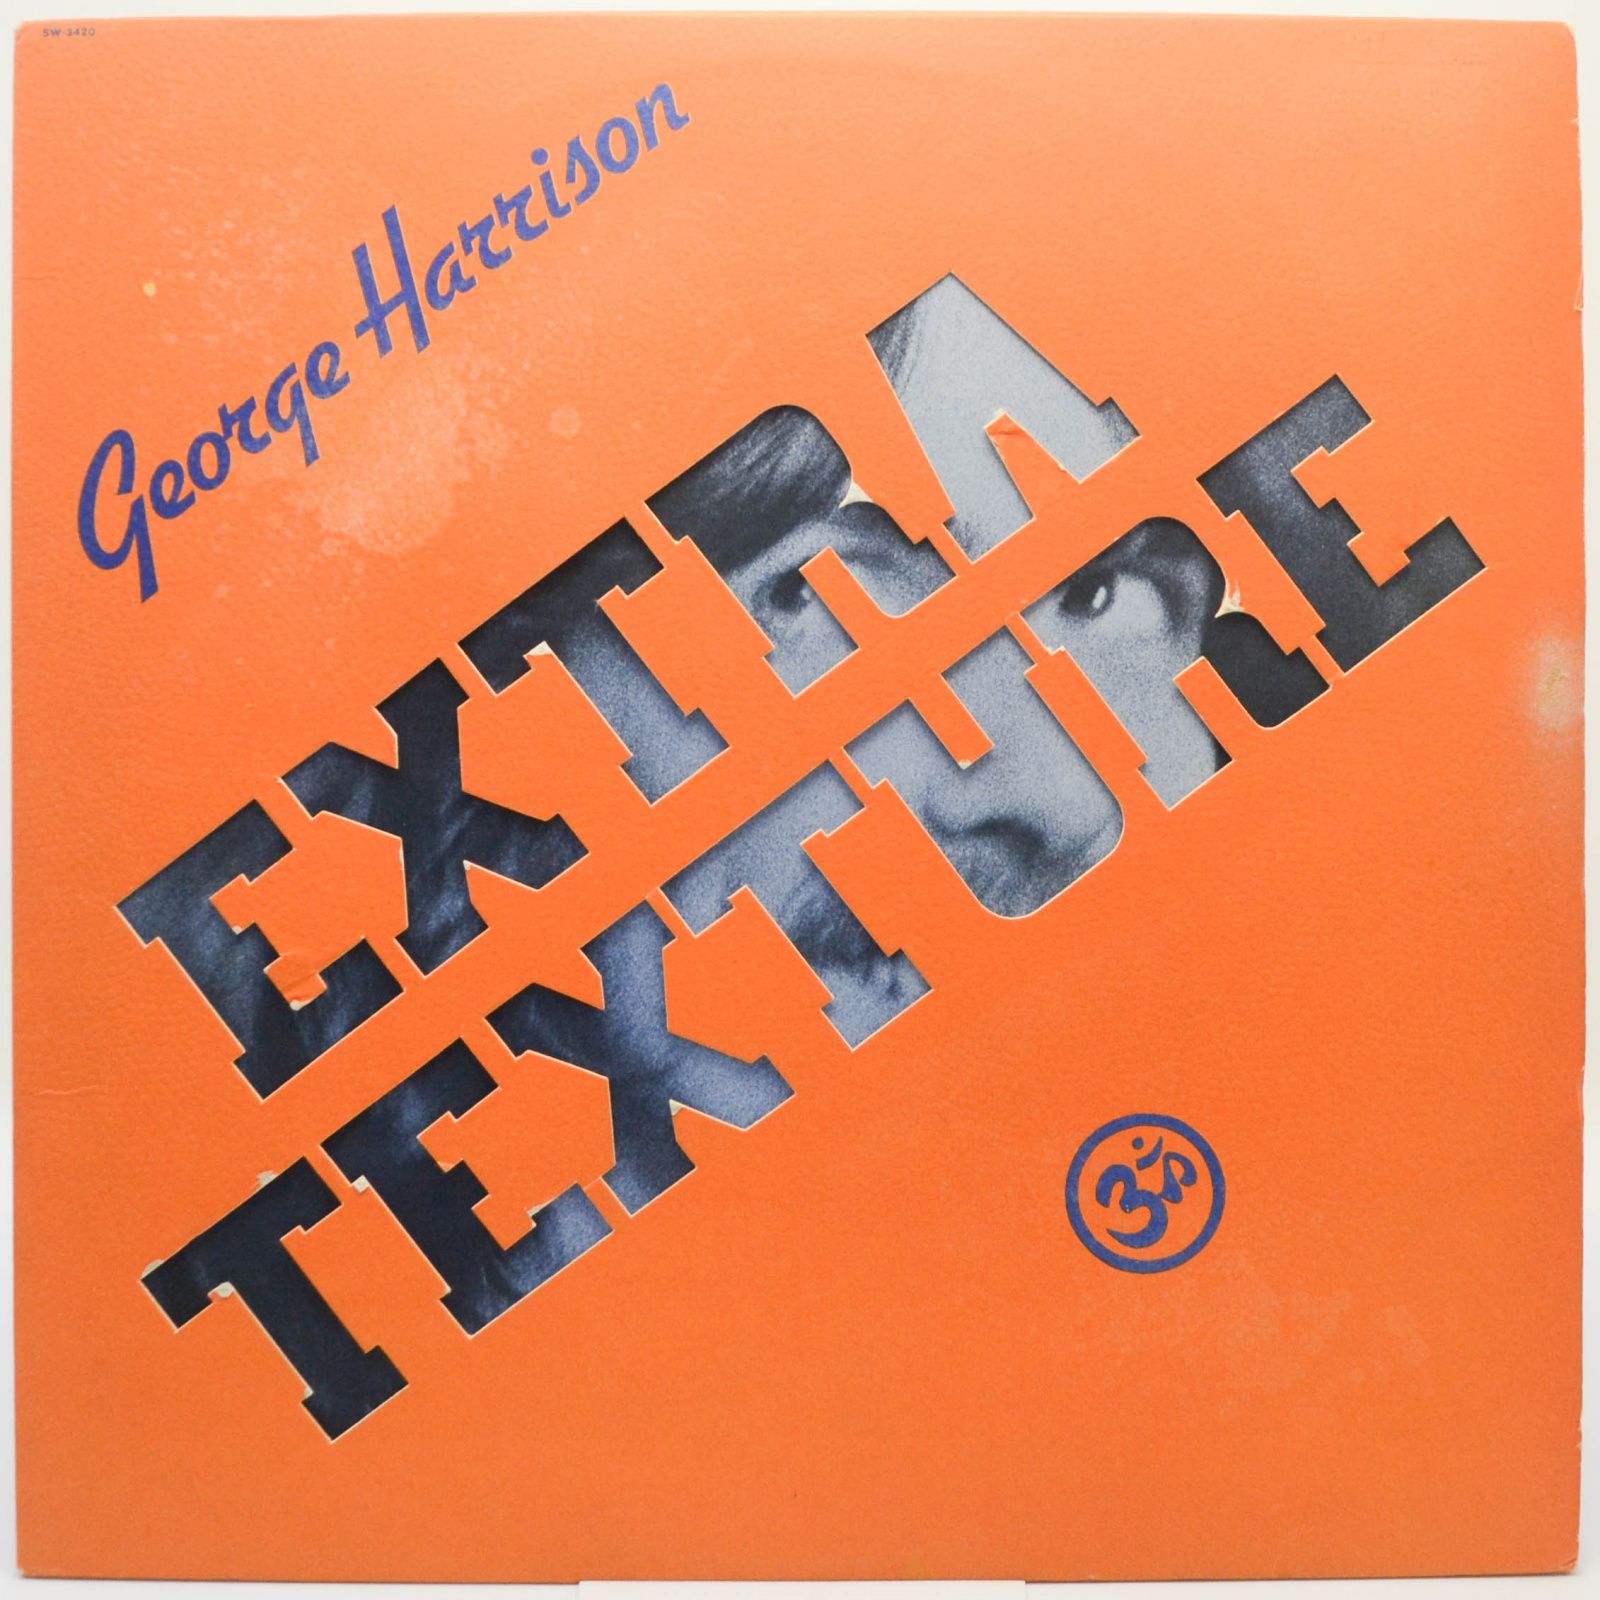 Extra Texture (Read All About It) (USA), 1975